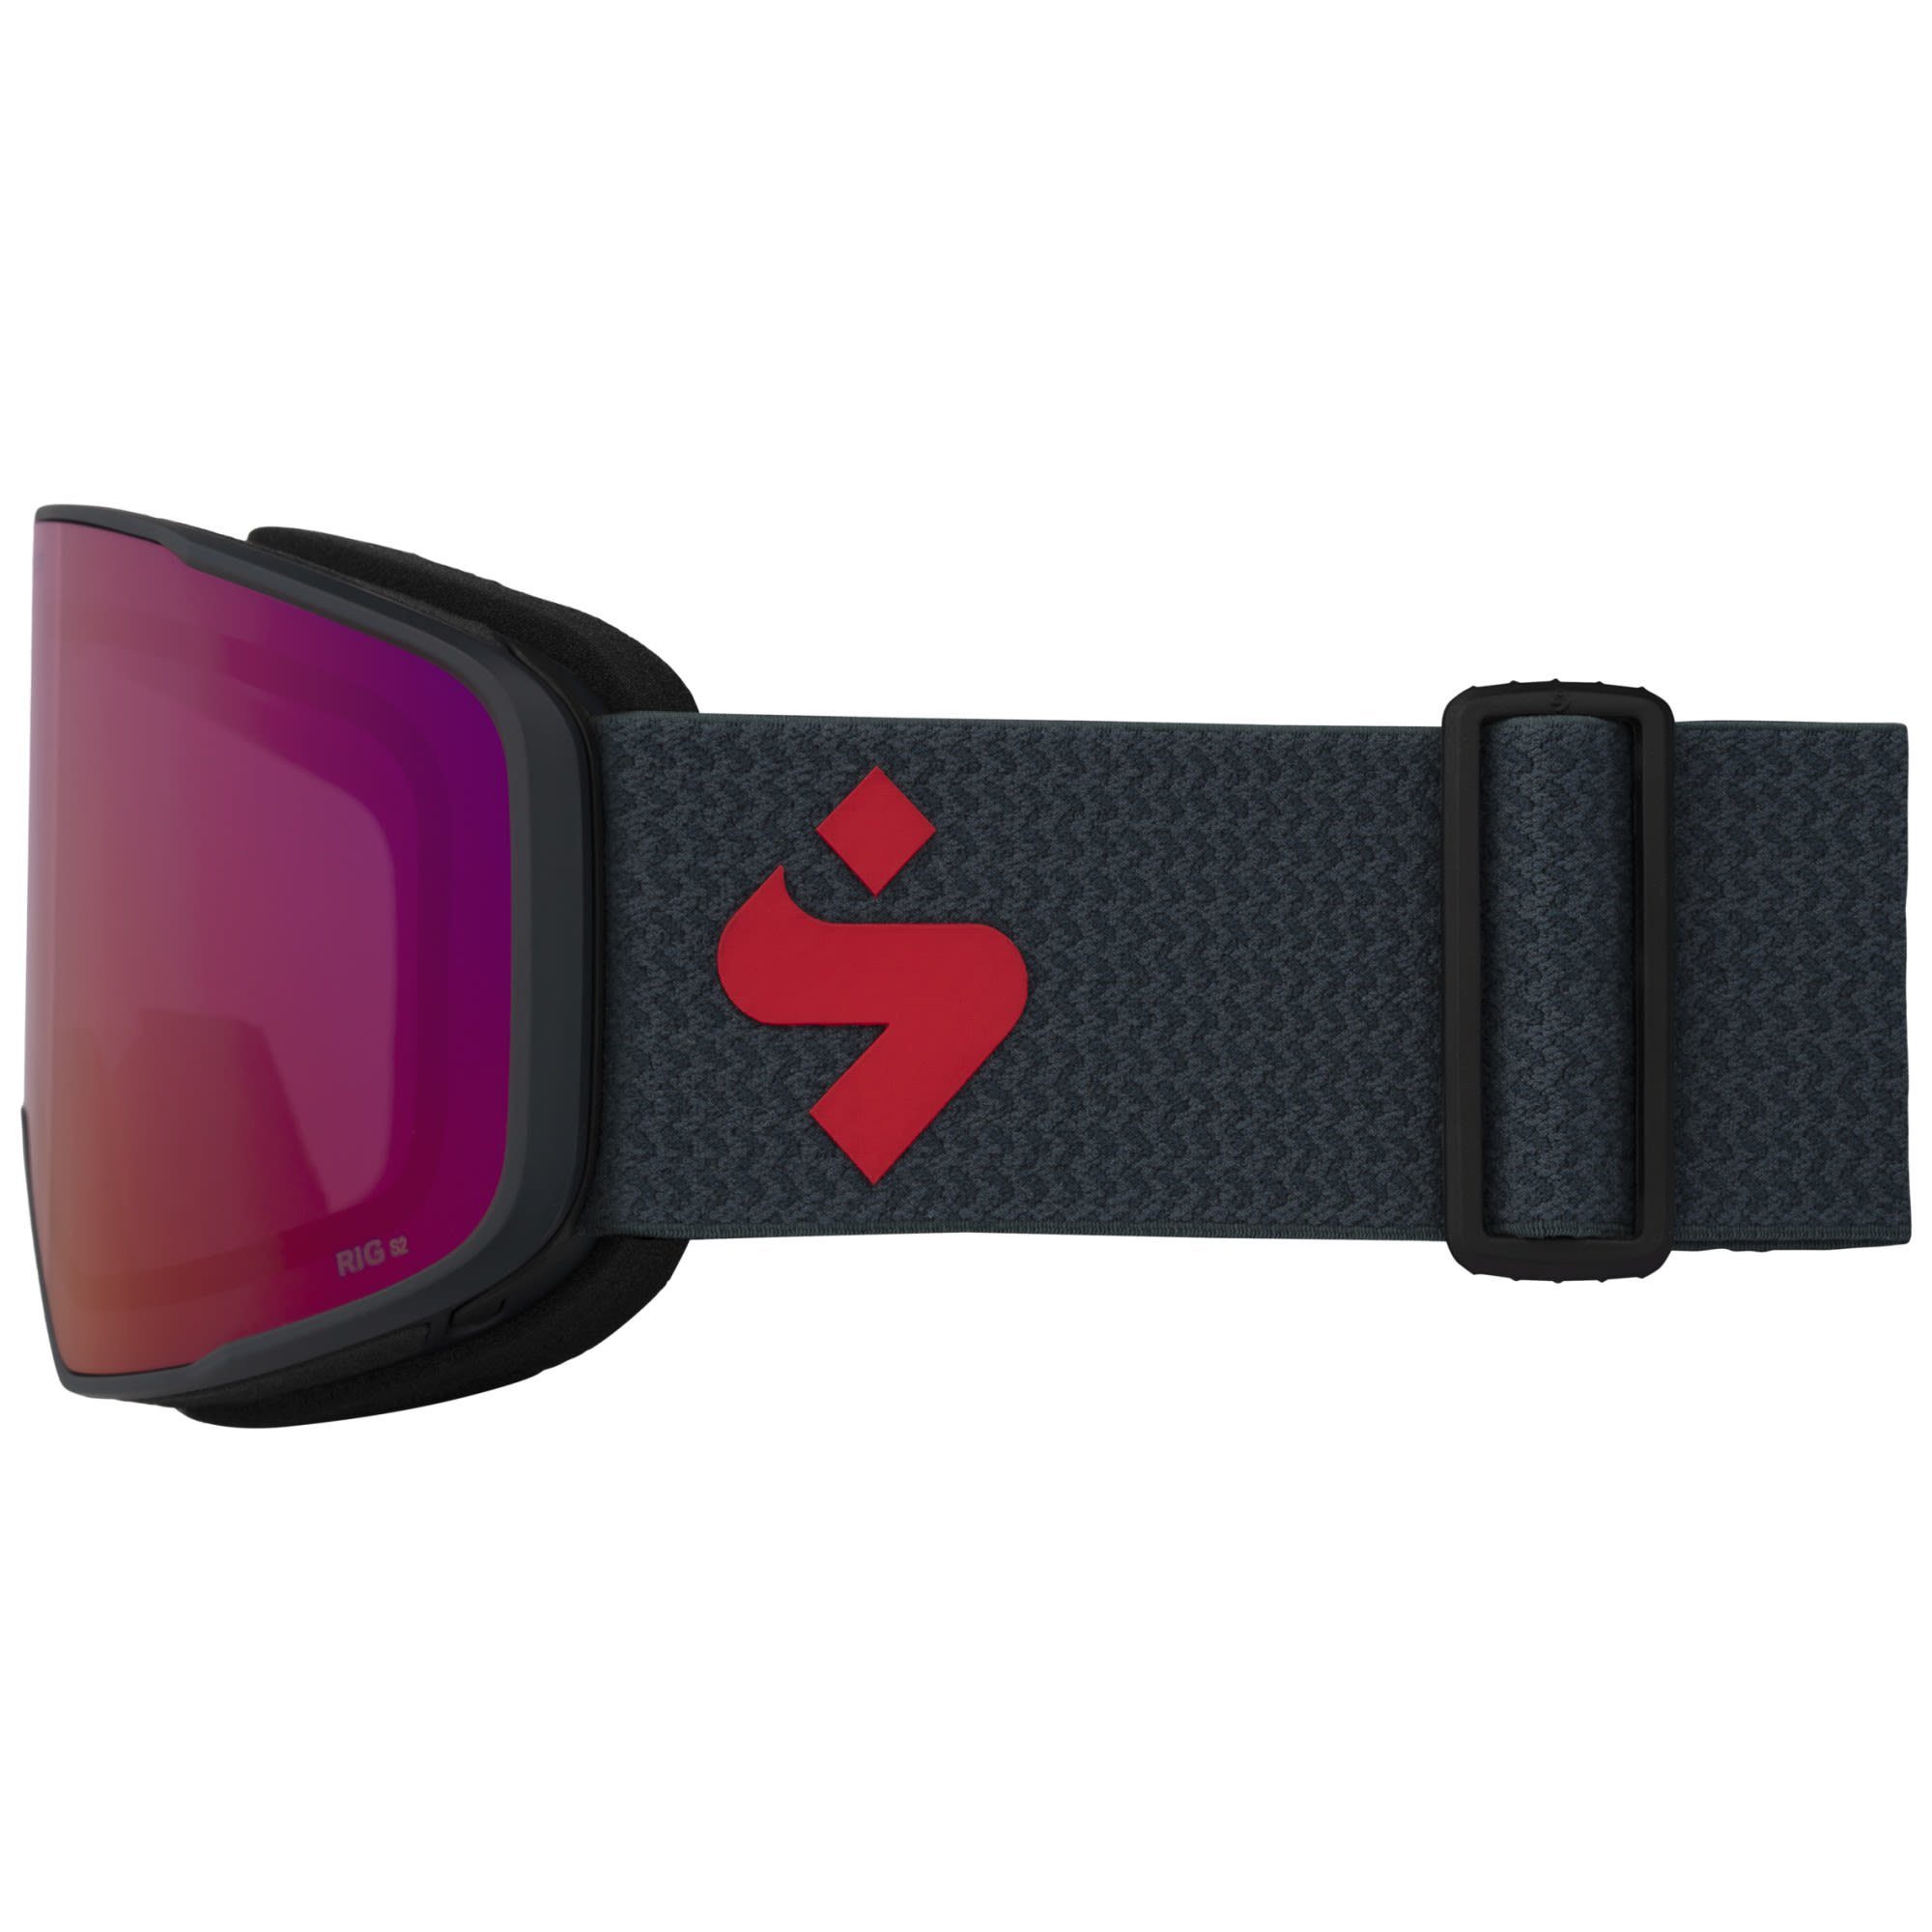 Sweet Protection Skibrille Accessoires Protection Sweet Reflect Rig Boondock